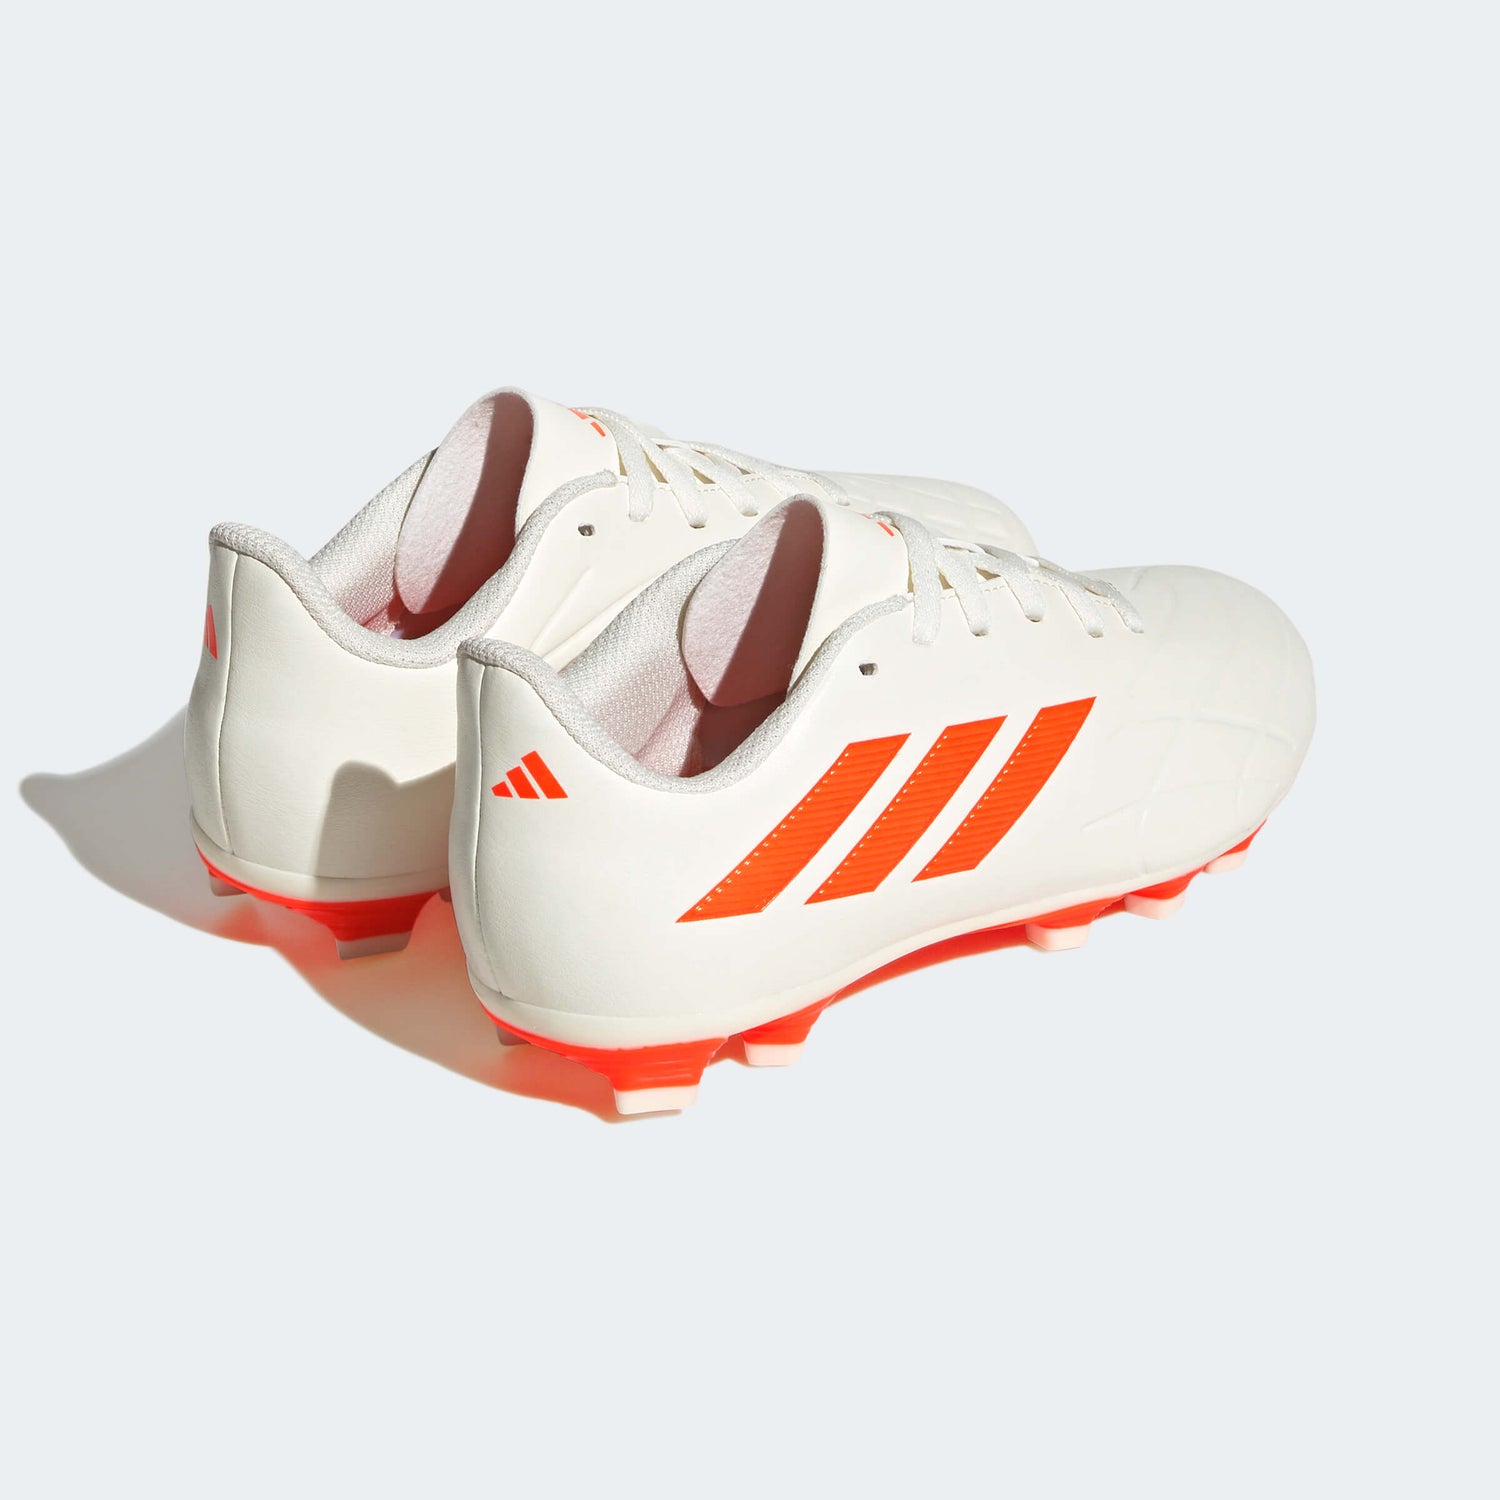 adidas Kids Copa Pure.4 FxG J - Heatspawn Pack (SP23) (Pair - Back Lateral)